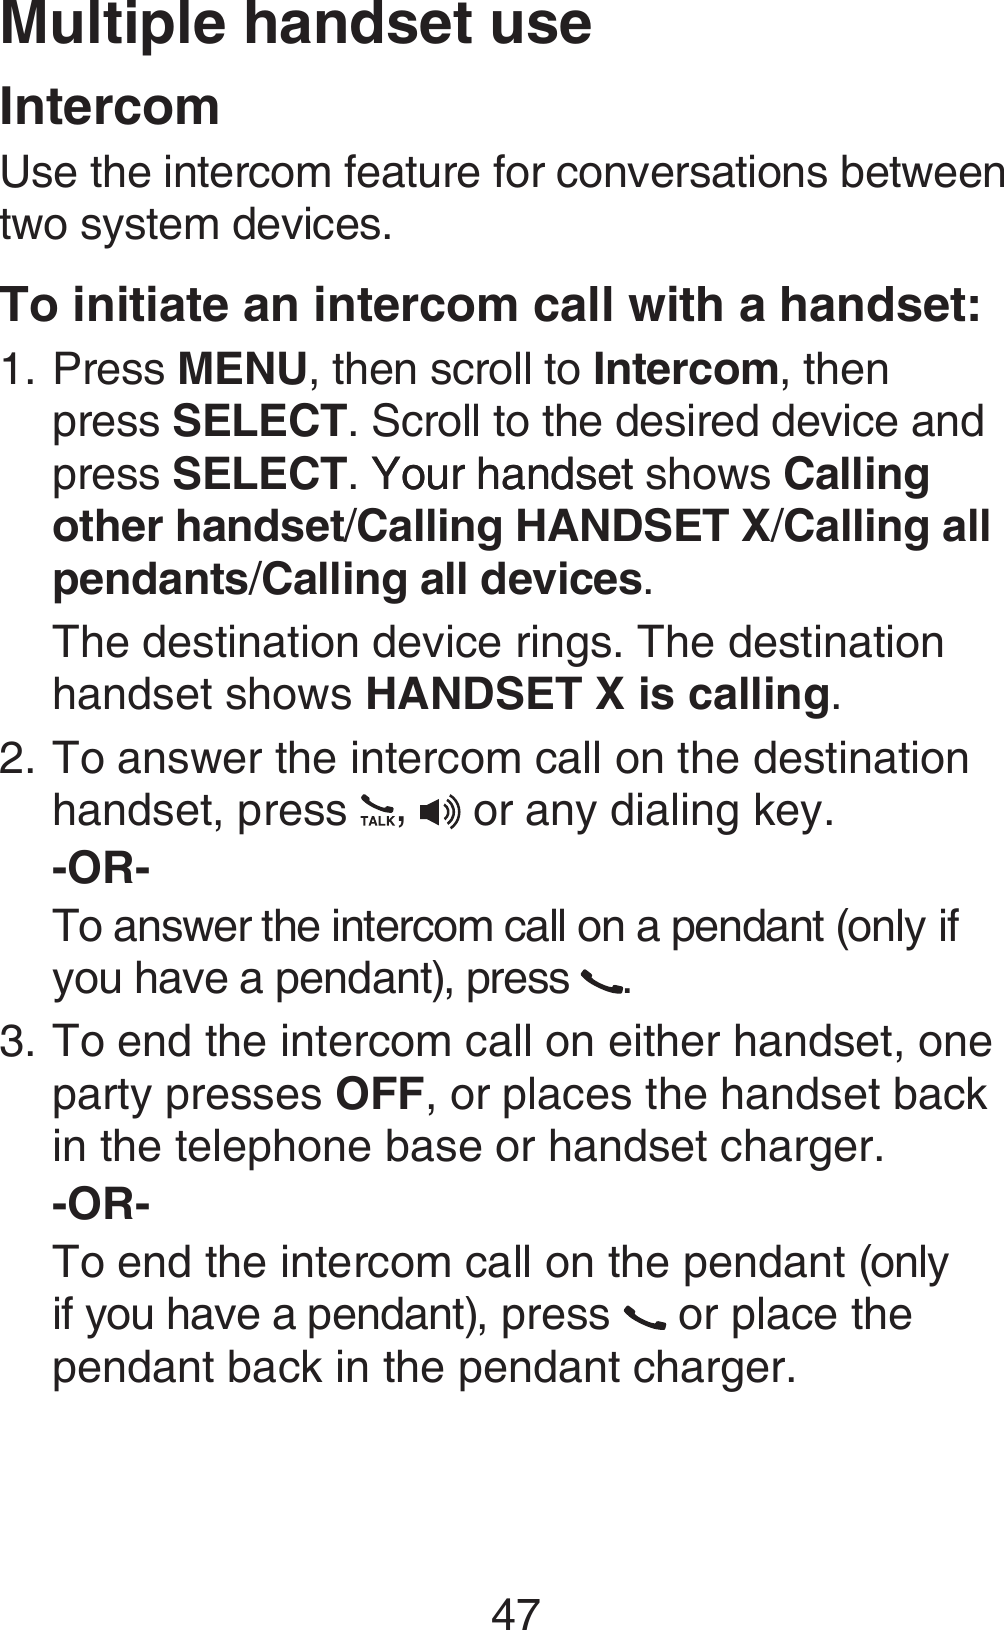 47Multiple handset useIntercomUse the intercom feature for conversations between two system devices.To initiate an intercom call with a handset:Press MENU, then scroll to Intercom, then press SELECT. Scroll to the desired device and press SELECT. Your handsetYour handset shows Calling other handset/Calling HANDSET X/Calling all pendants/Calling all devices.The destination device rings. The destination handset shows HANDSET X is calling.To answer the intercom call on the destination handset, press  ,  or any dialing key.-OR-To answer the intercom call on a pendant (only if you have a pendant), press  .To end the intercom call on either handset, one party presses OFF, or places the handset back in the telephone base or handset charger.-OR-To end the intercom call on the pendant (only if you have a pendant), press   or place the pendant back in the pendant charger.1.2.3.